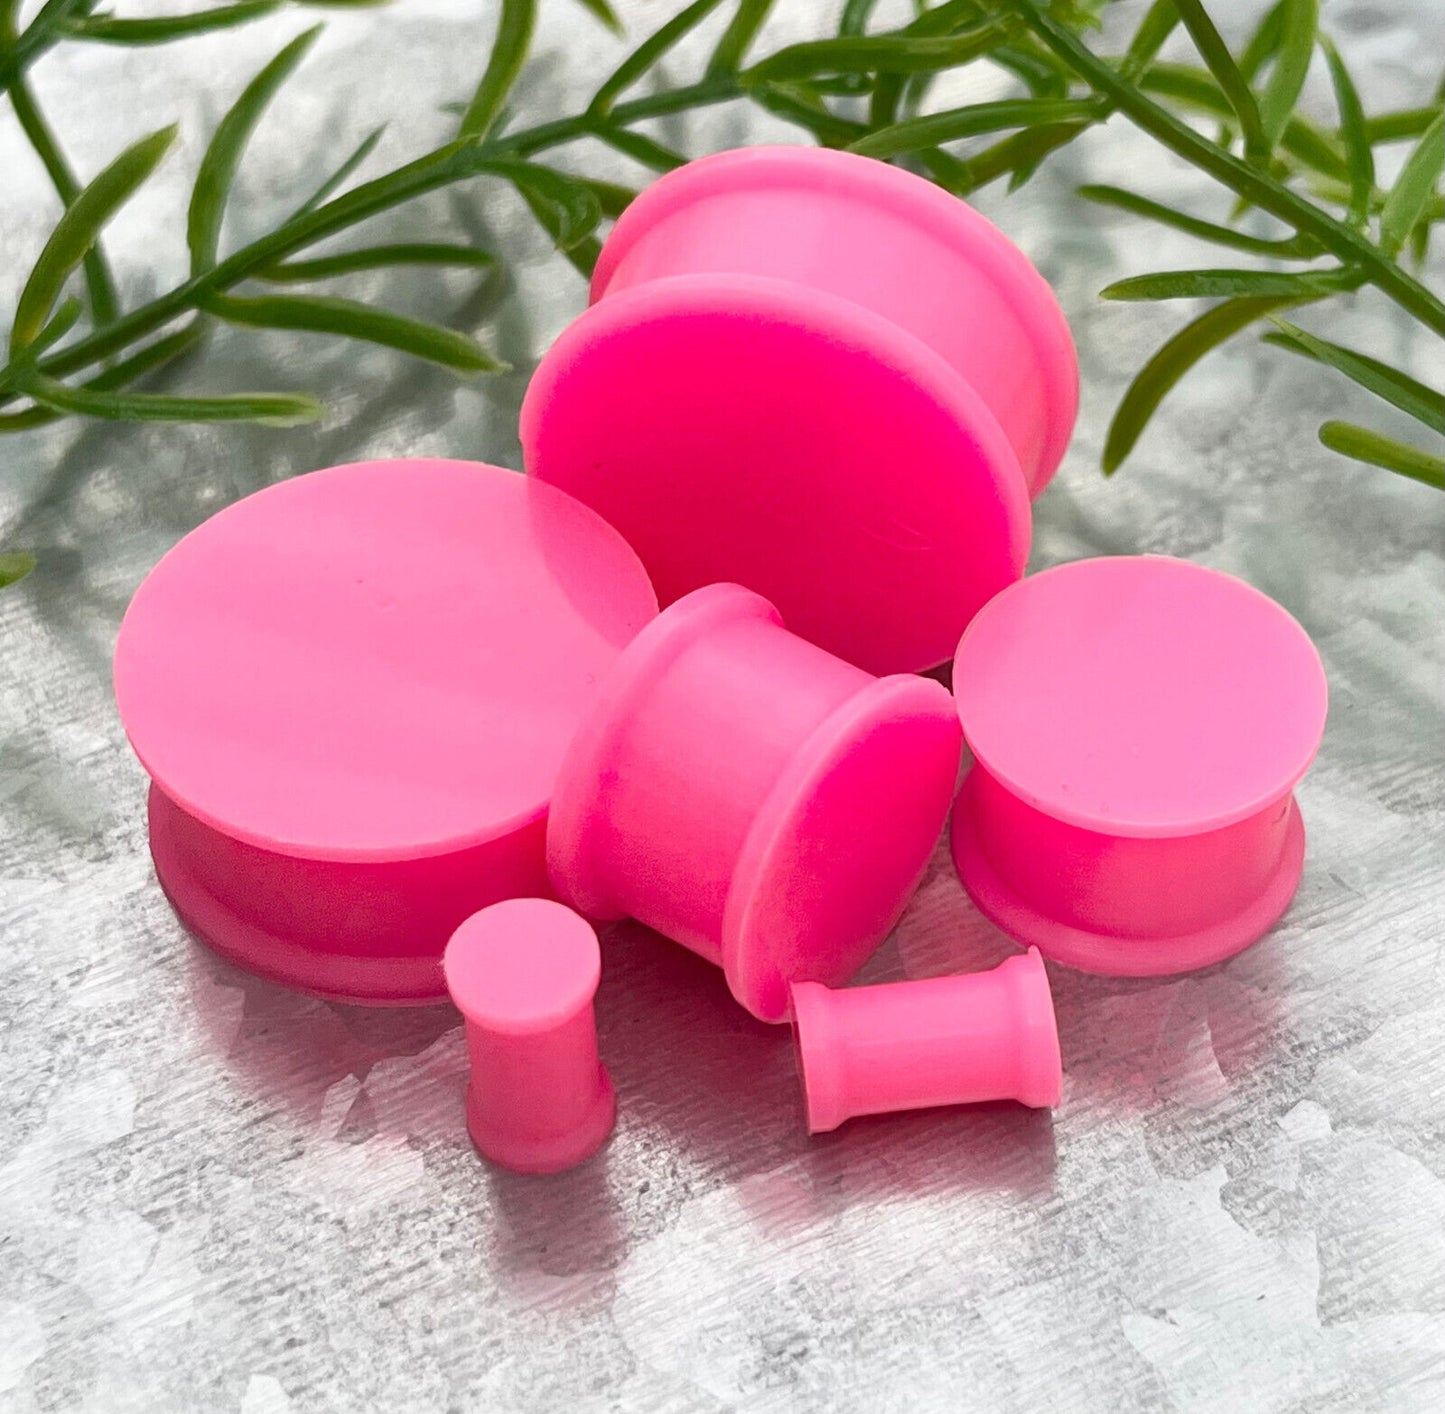 PAIR Solid Silicone Plugs Earlets Gauges 8g 6g 4g 2g 0g 00g + large sizes to 2"